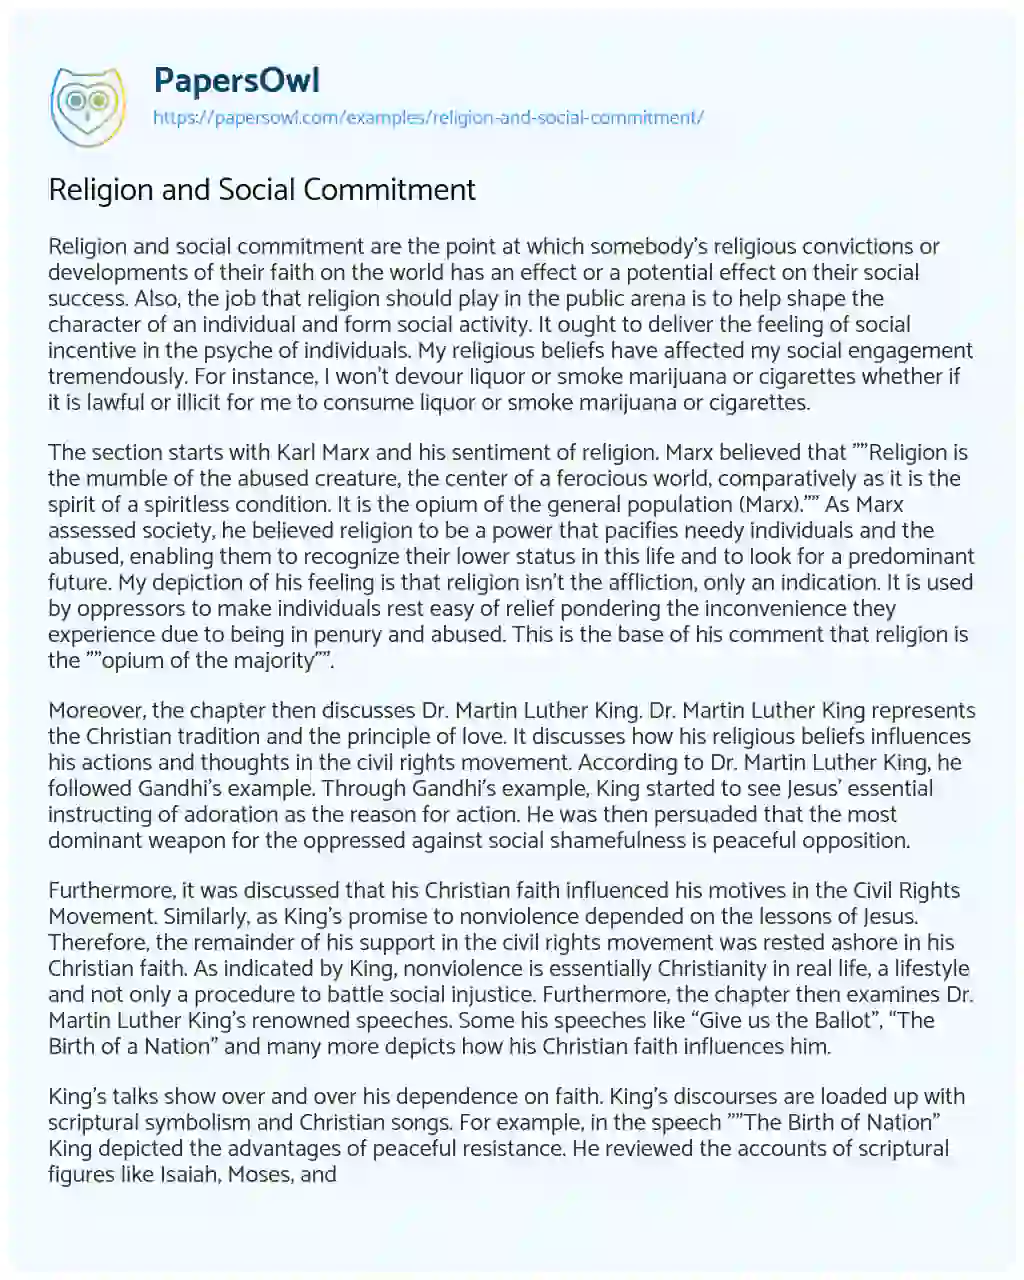 Religion and Social Commitment essay